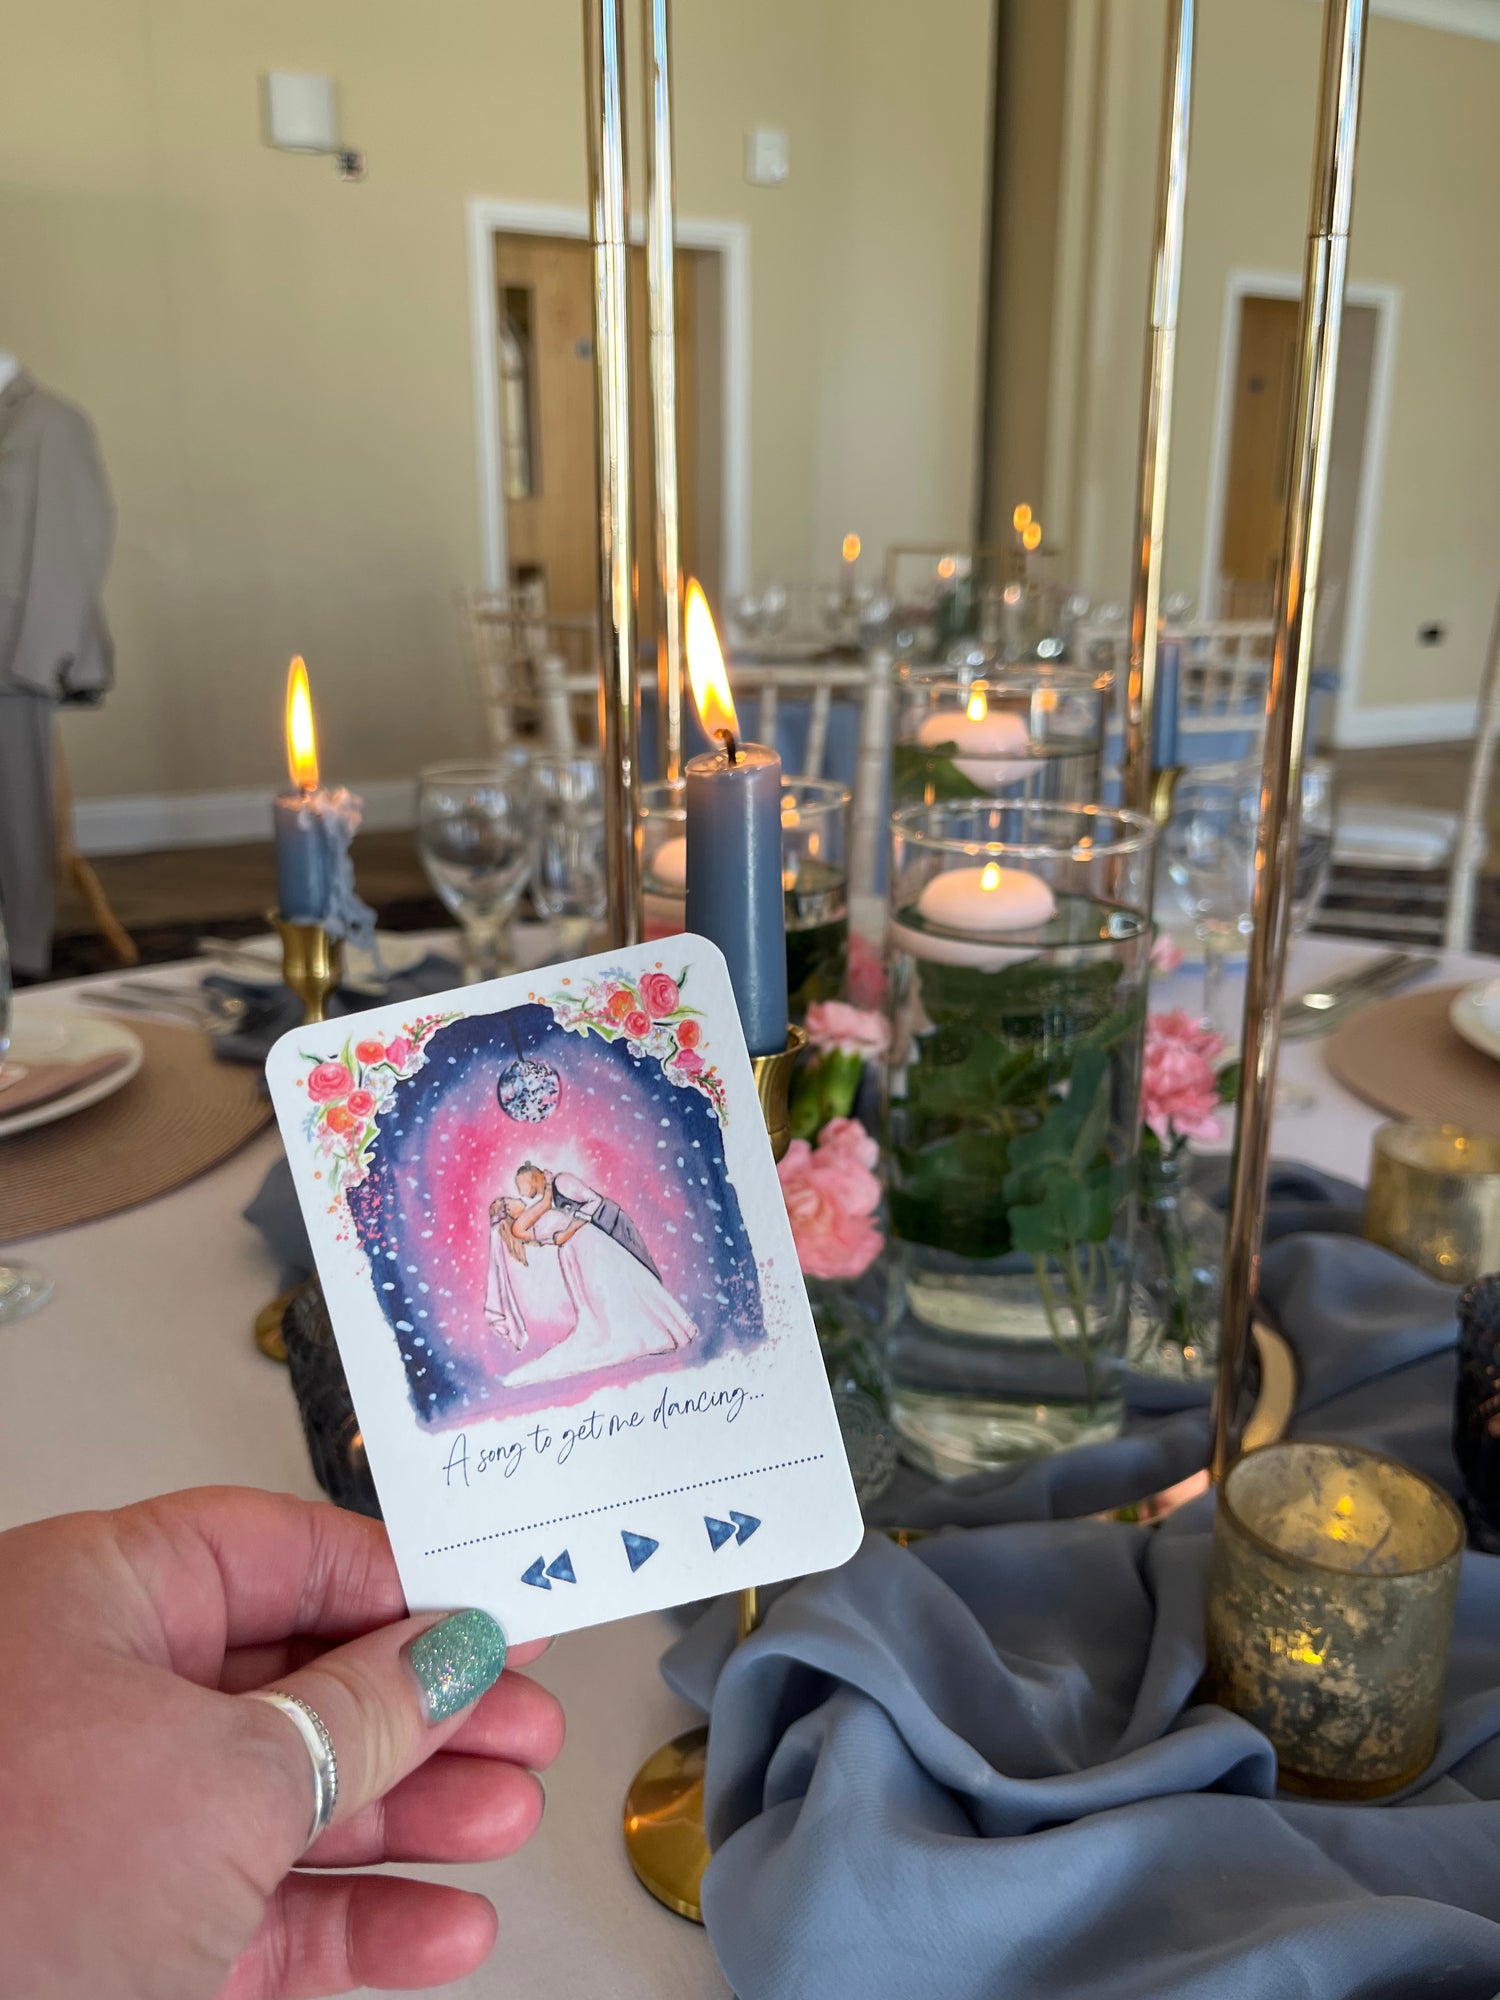 A unique song request card as part of this luxury bespoke wedding stationery suite by Eve Leoni Art. Venue styling in the background is by Amy at Jack and Jill.